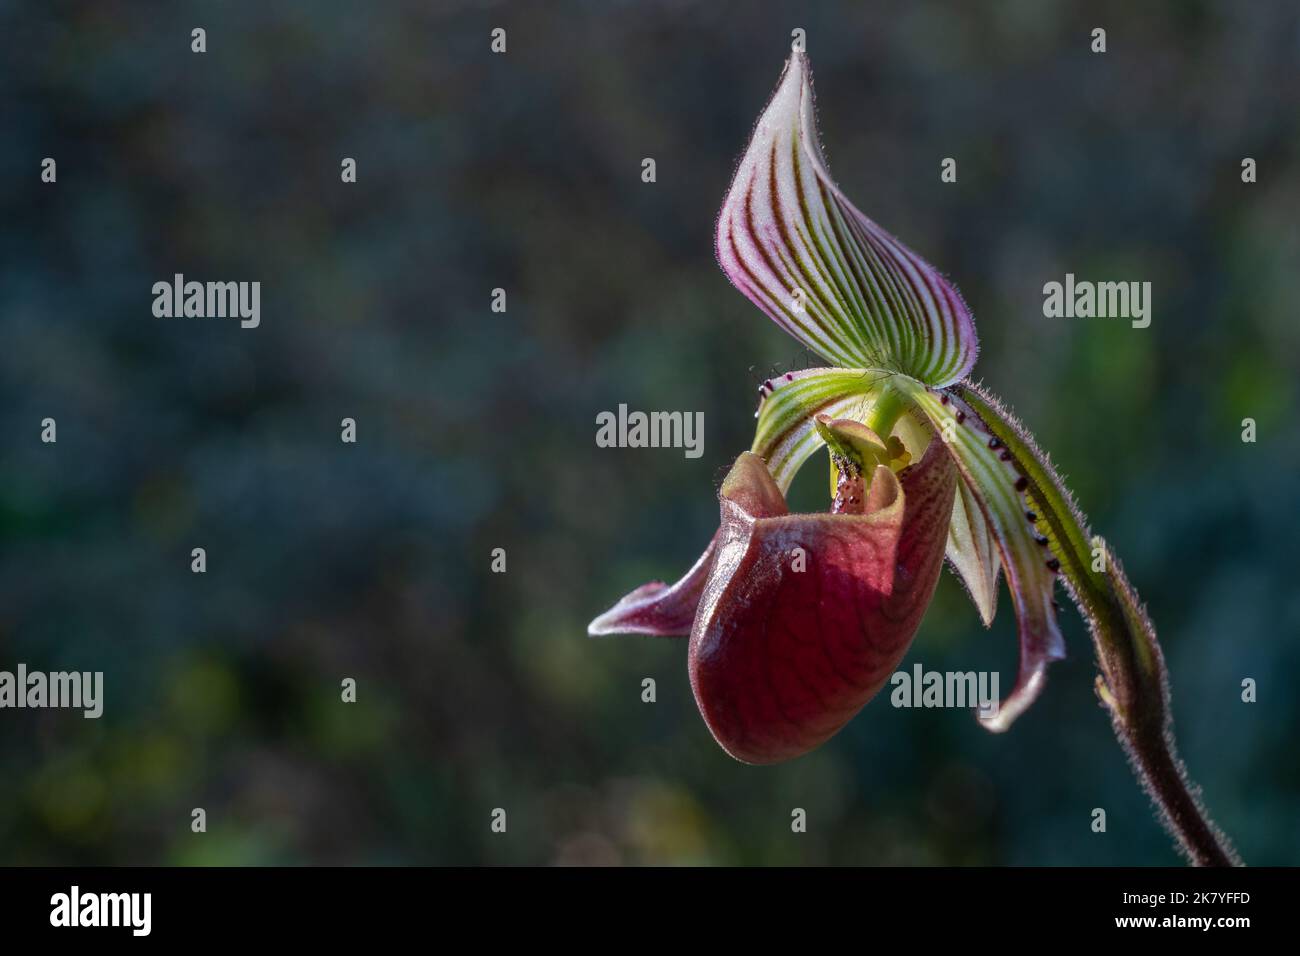 Closeup side view of beautiful purple, white and green lady slipper orchid flower paphiopedilum fowliei species isolated on natural background Stock Photo